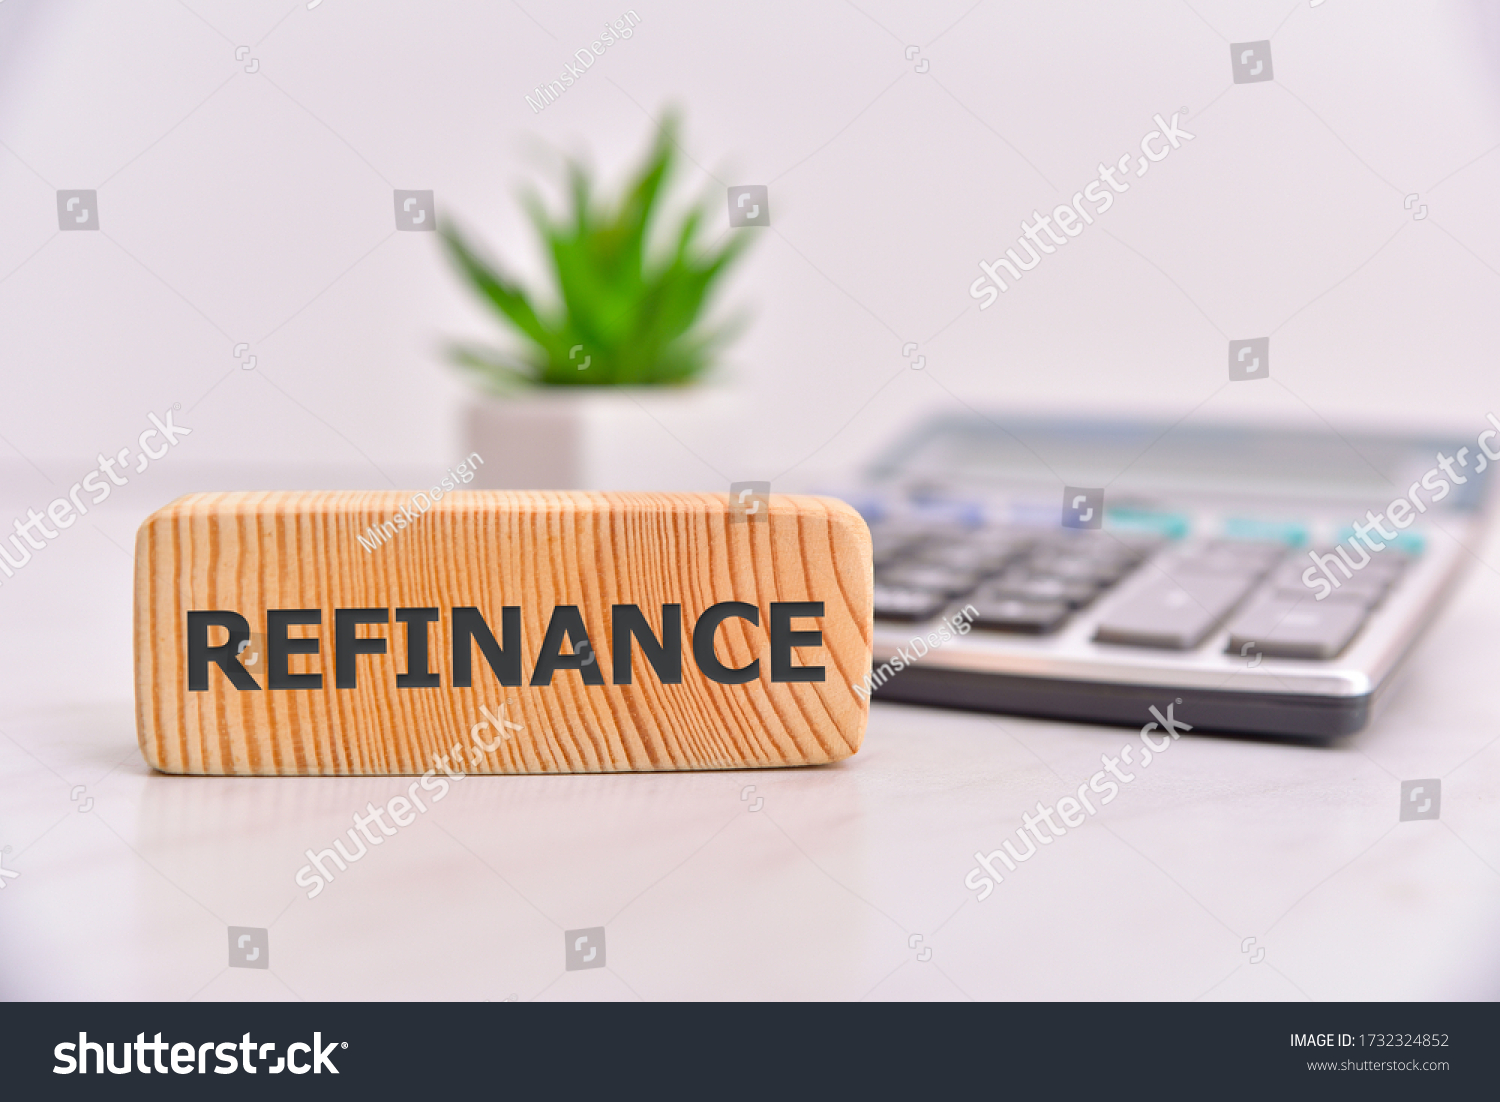 Refinance word on wooden block. Office table background. #1732324852